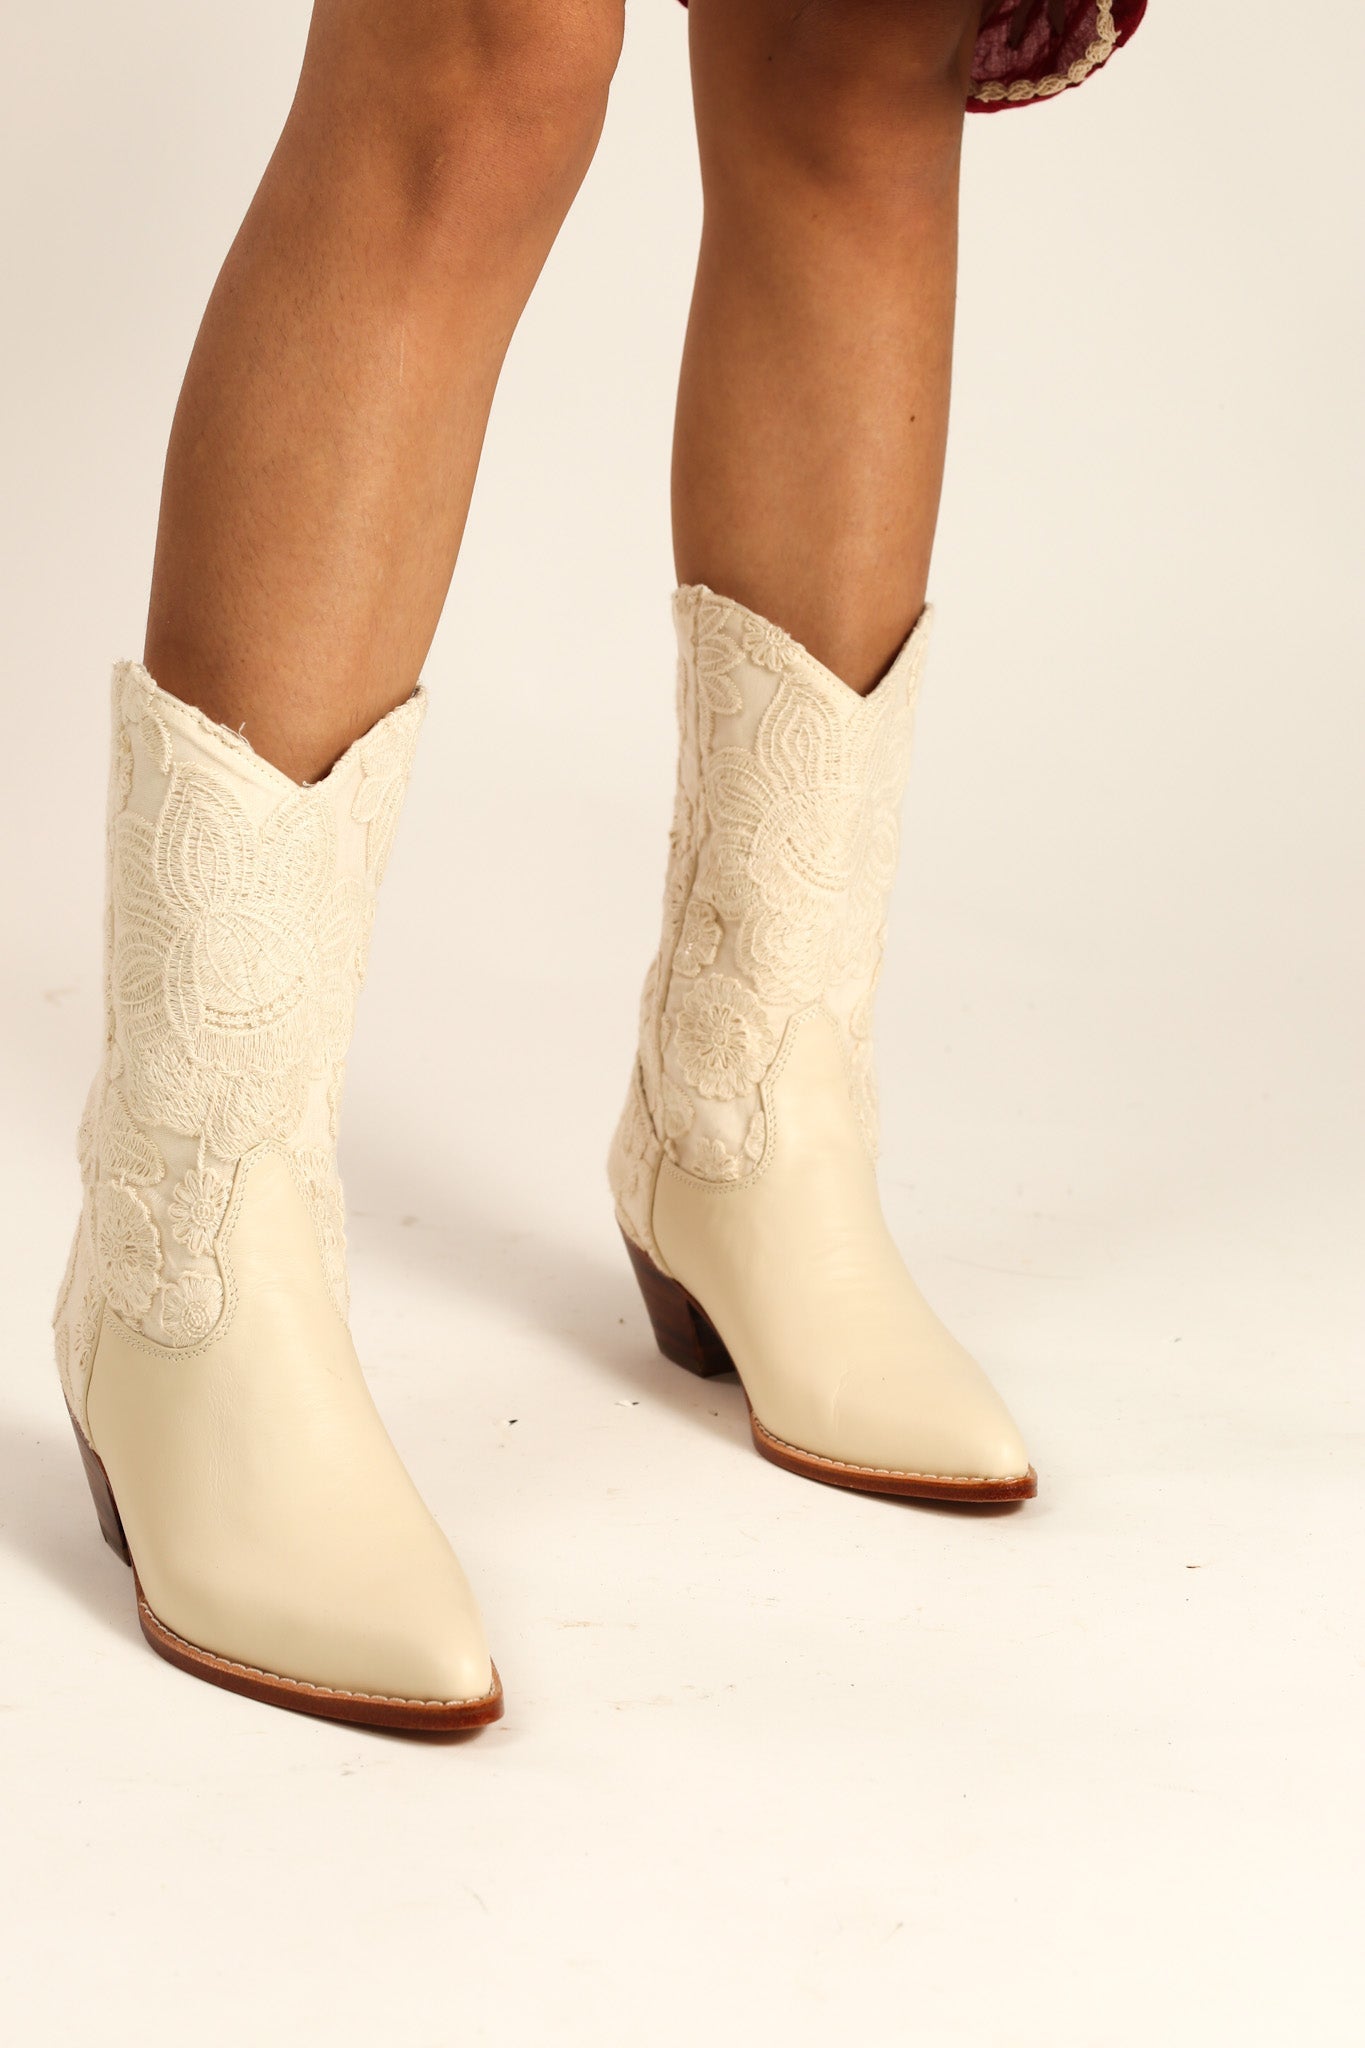 CREAM WEDDING BOOTS LACE SEQUIN DETAIL